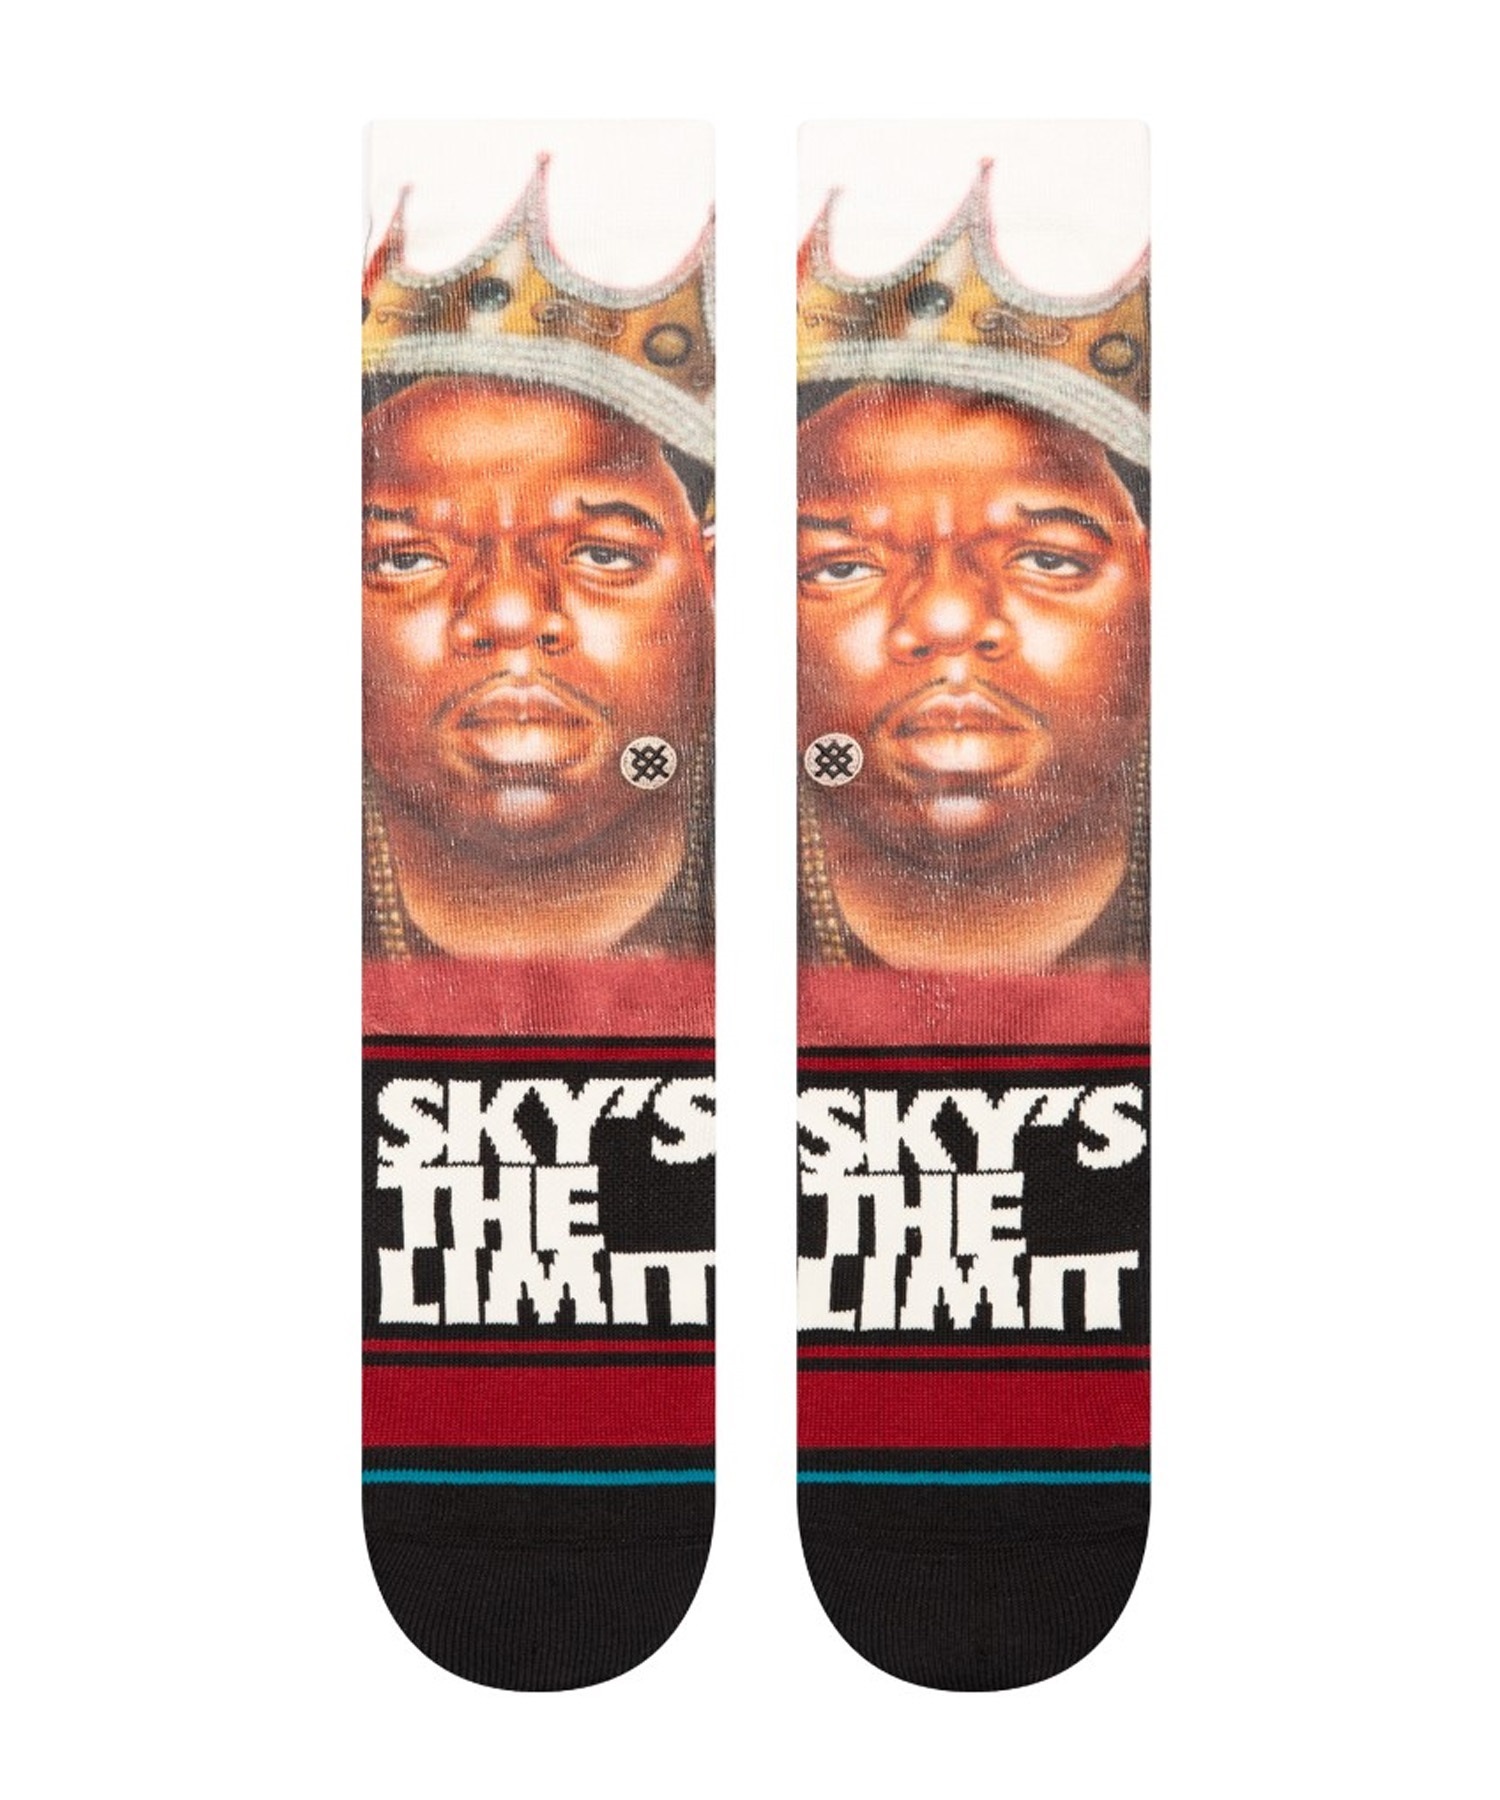 STANCE スタンス SKYS THE LIMIT ソックス 靴下 BIGGIE ビギーコラボモデル ノトーリアス・B.I.G The Notorious B.I.G. A555D23SKY(BLK-L)